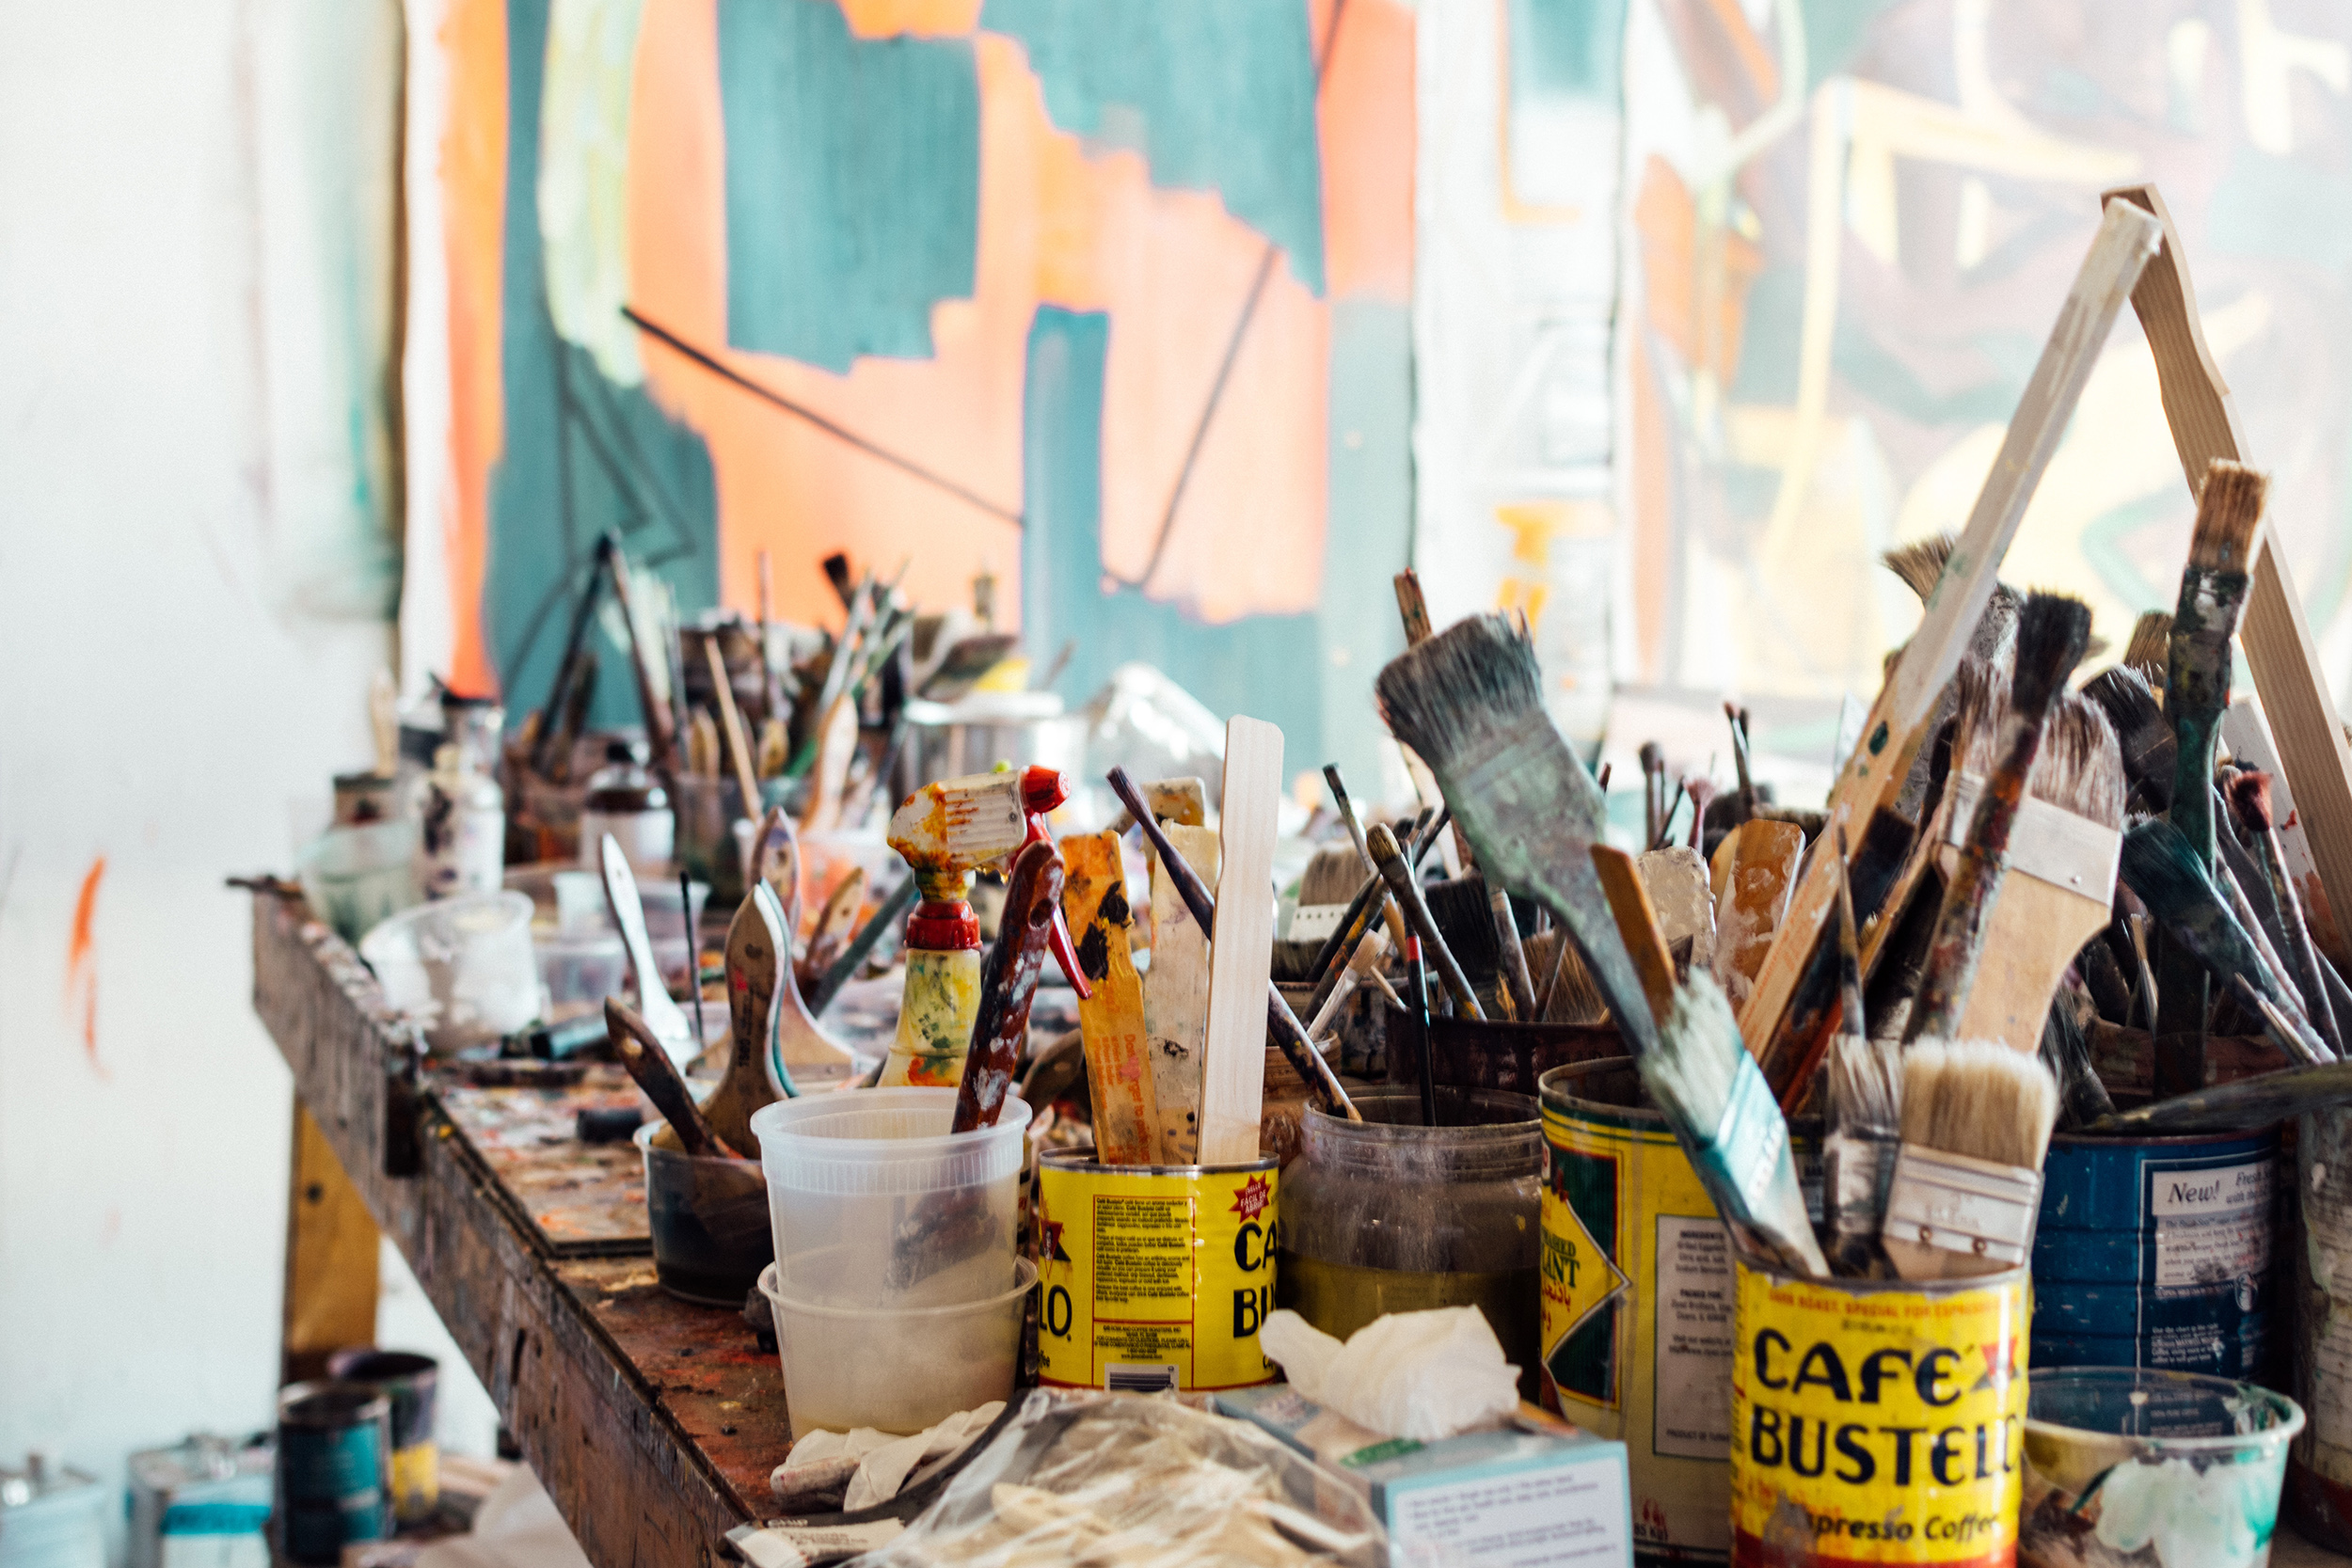  Brushes and studio supplies at our artist workshop in the Tuscany region near the town of Siena in Italy. 